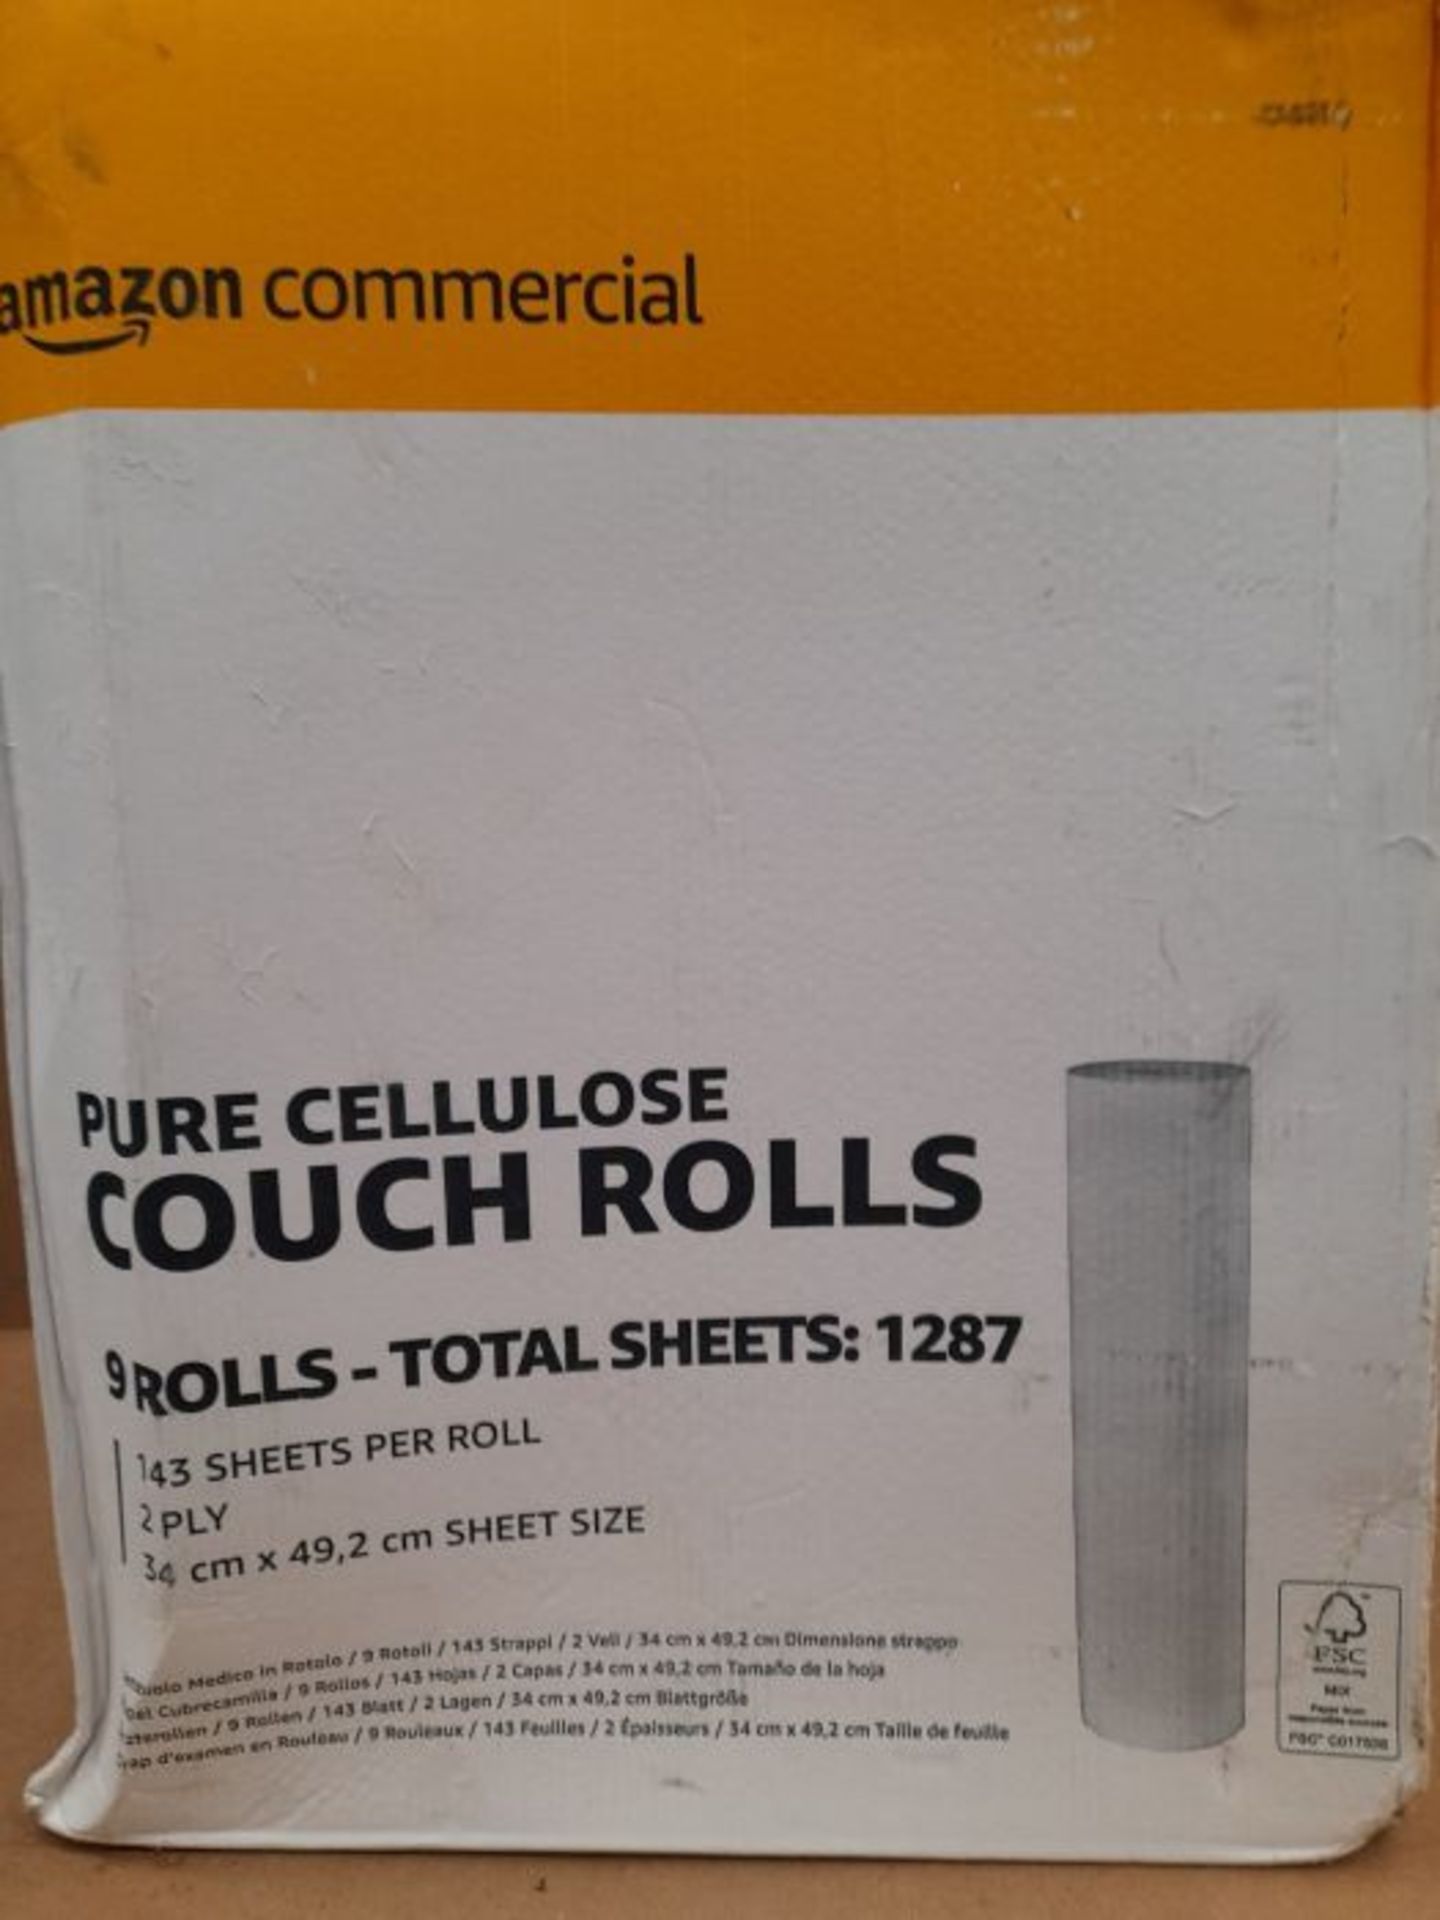 AmazonCommercial Premium Cellulose Couch Rolls, 20" - 2 PLY - 50 Metres per roll, 9-Pa - Image 2 of 3